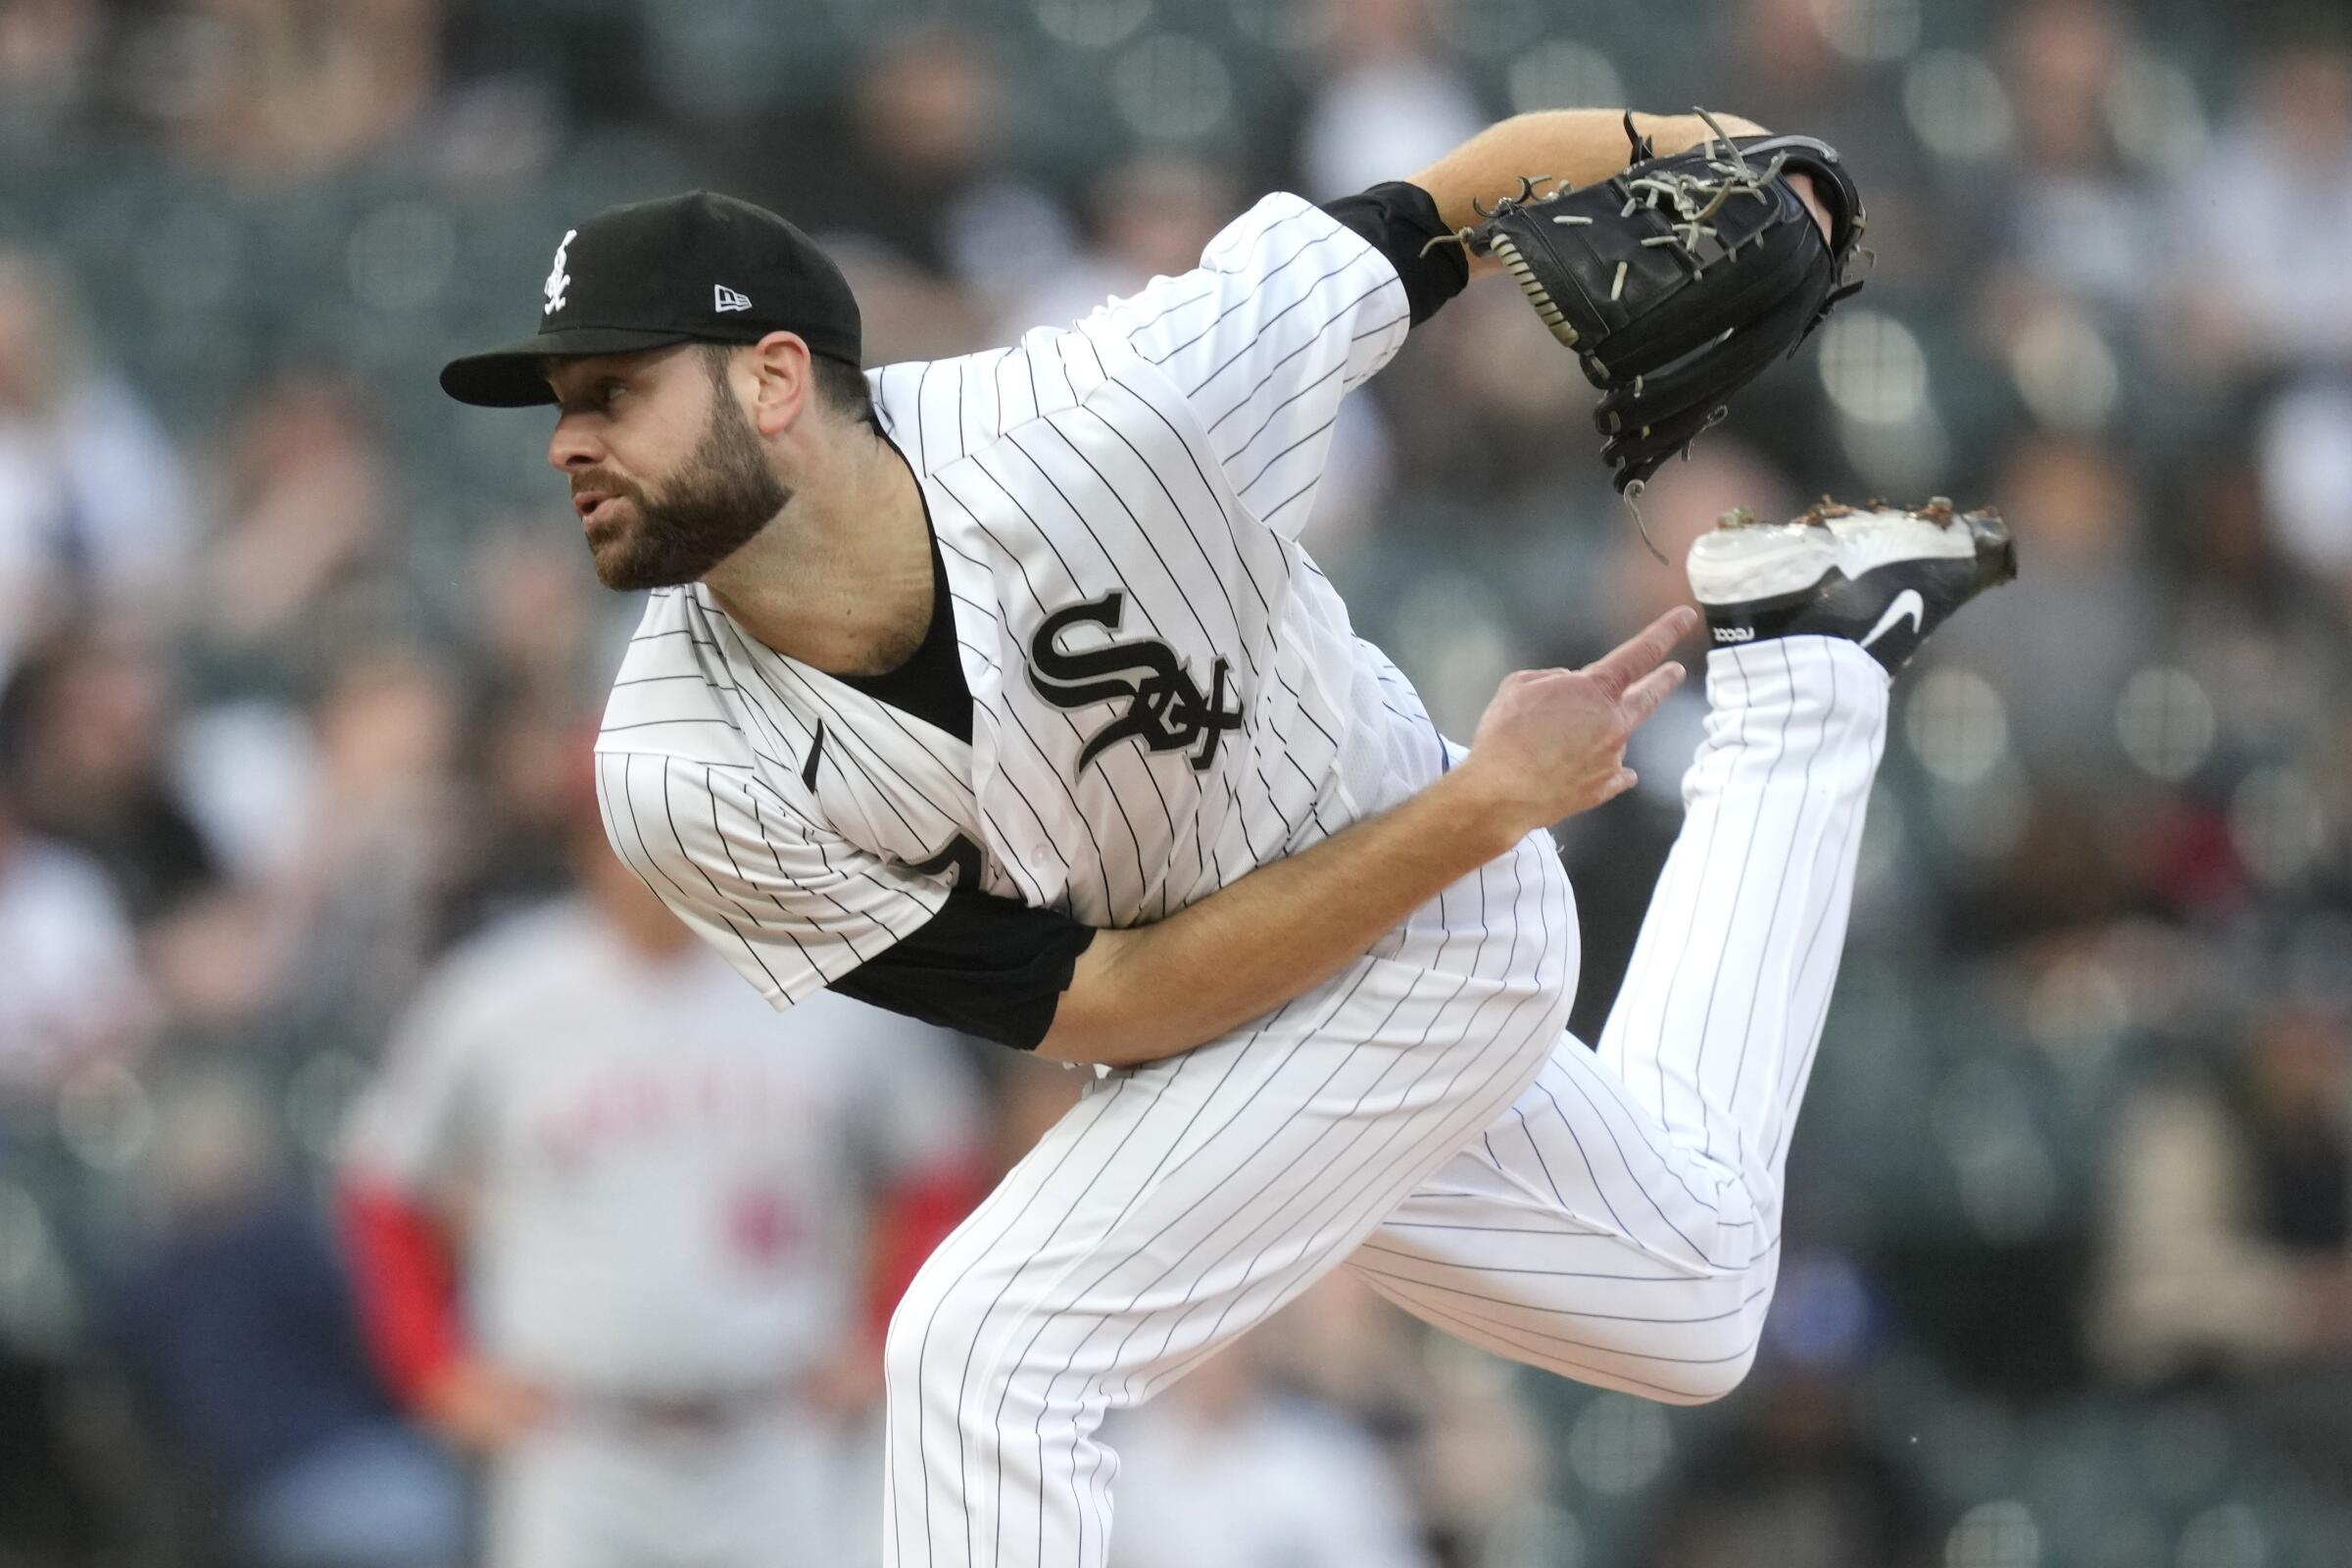 Could the Chicago White Sox move? Everything to know